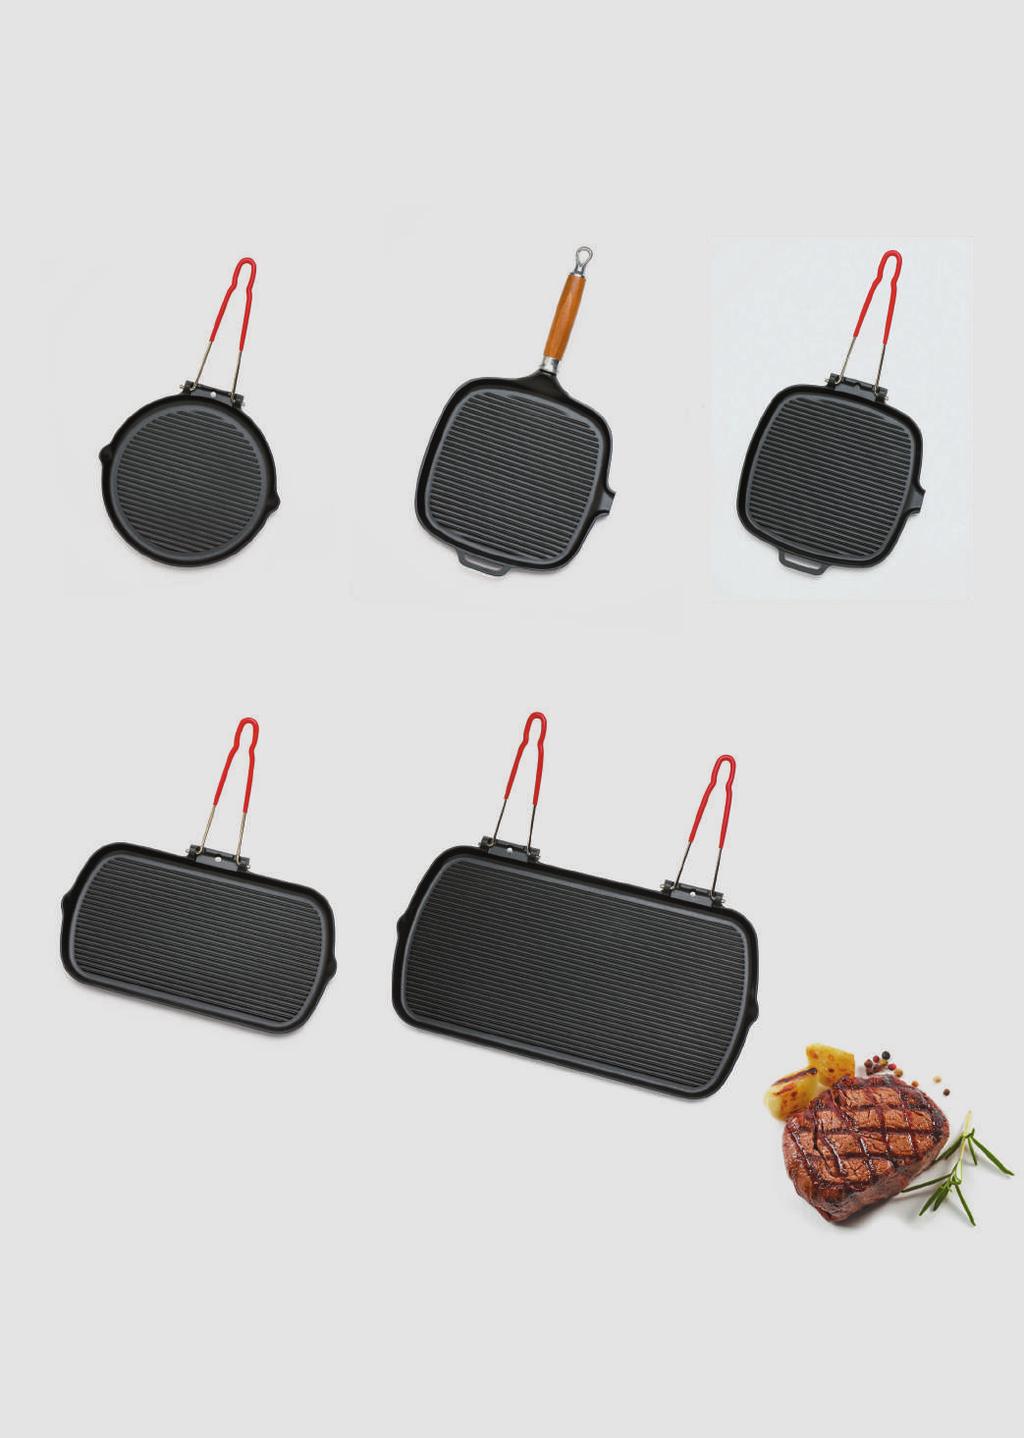 GRILLS DISHES & GRILLS Round grill pan w/ folding handle Ref. 32710 - Black L 25,5 x l 25,5 x h 3 cm - 1,4 kg Square grill pan w/ wooden handle Ref.